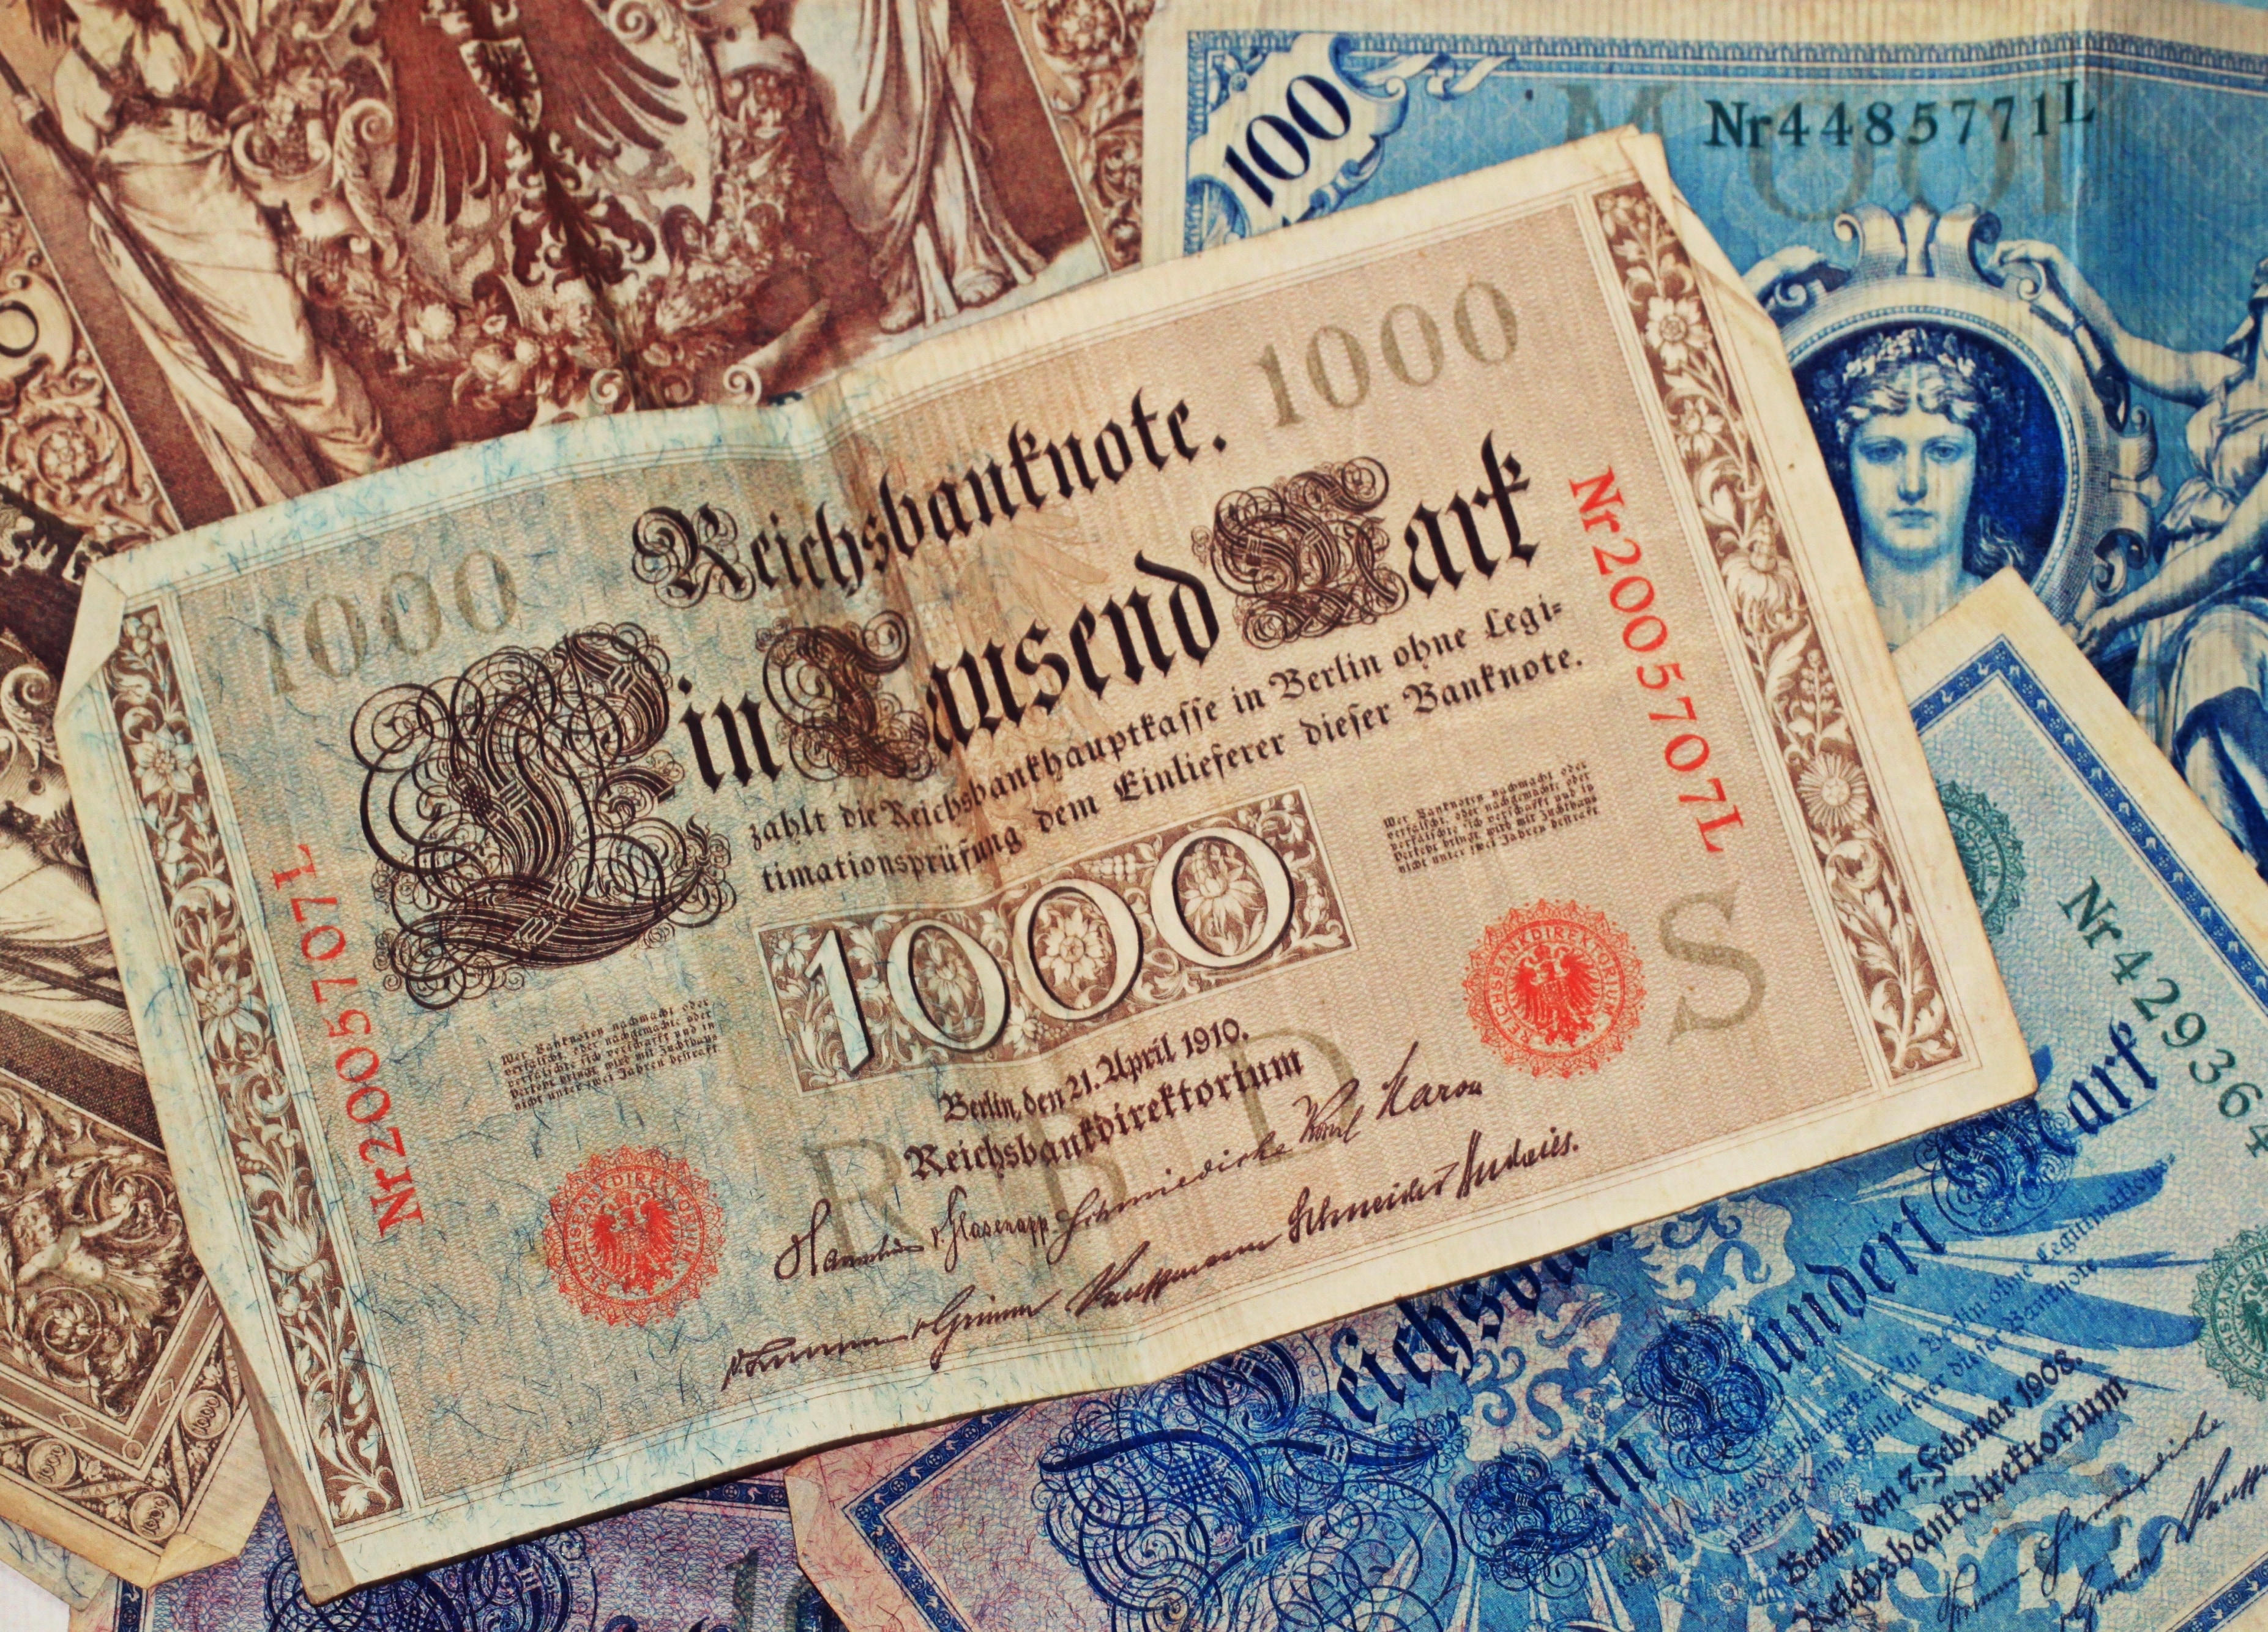 Currency, Bank Note, Imperial Banknote, paper currency, close-up